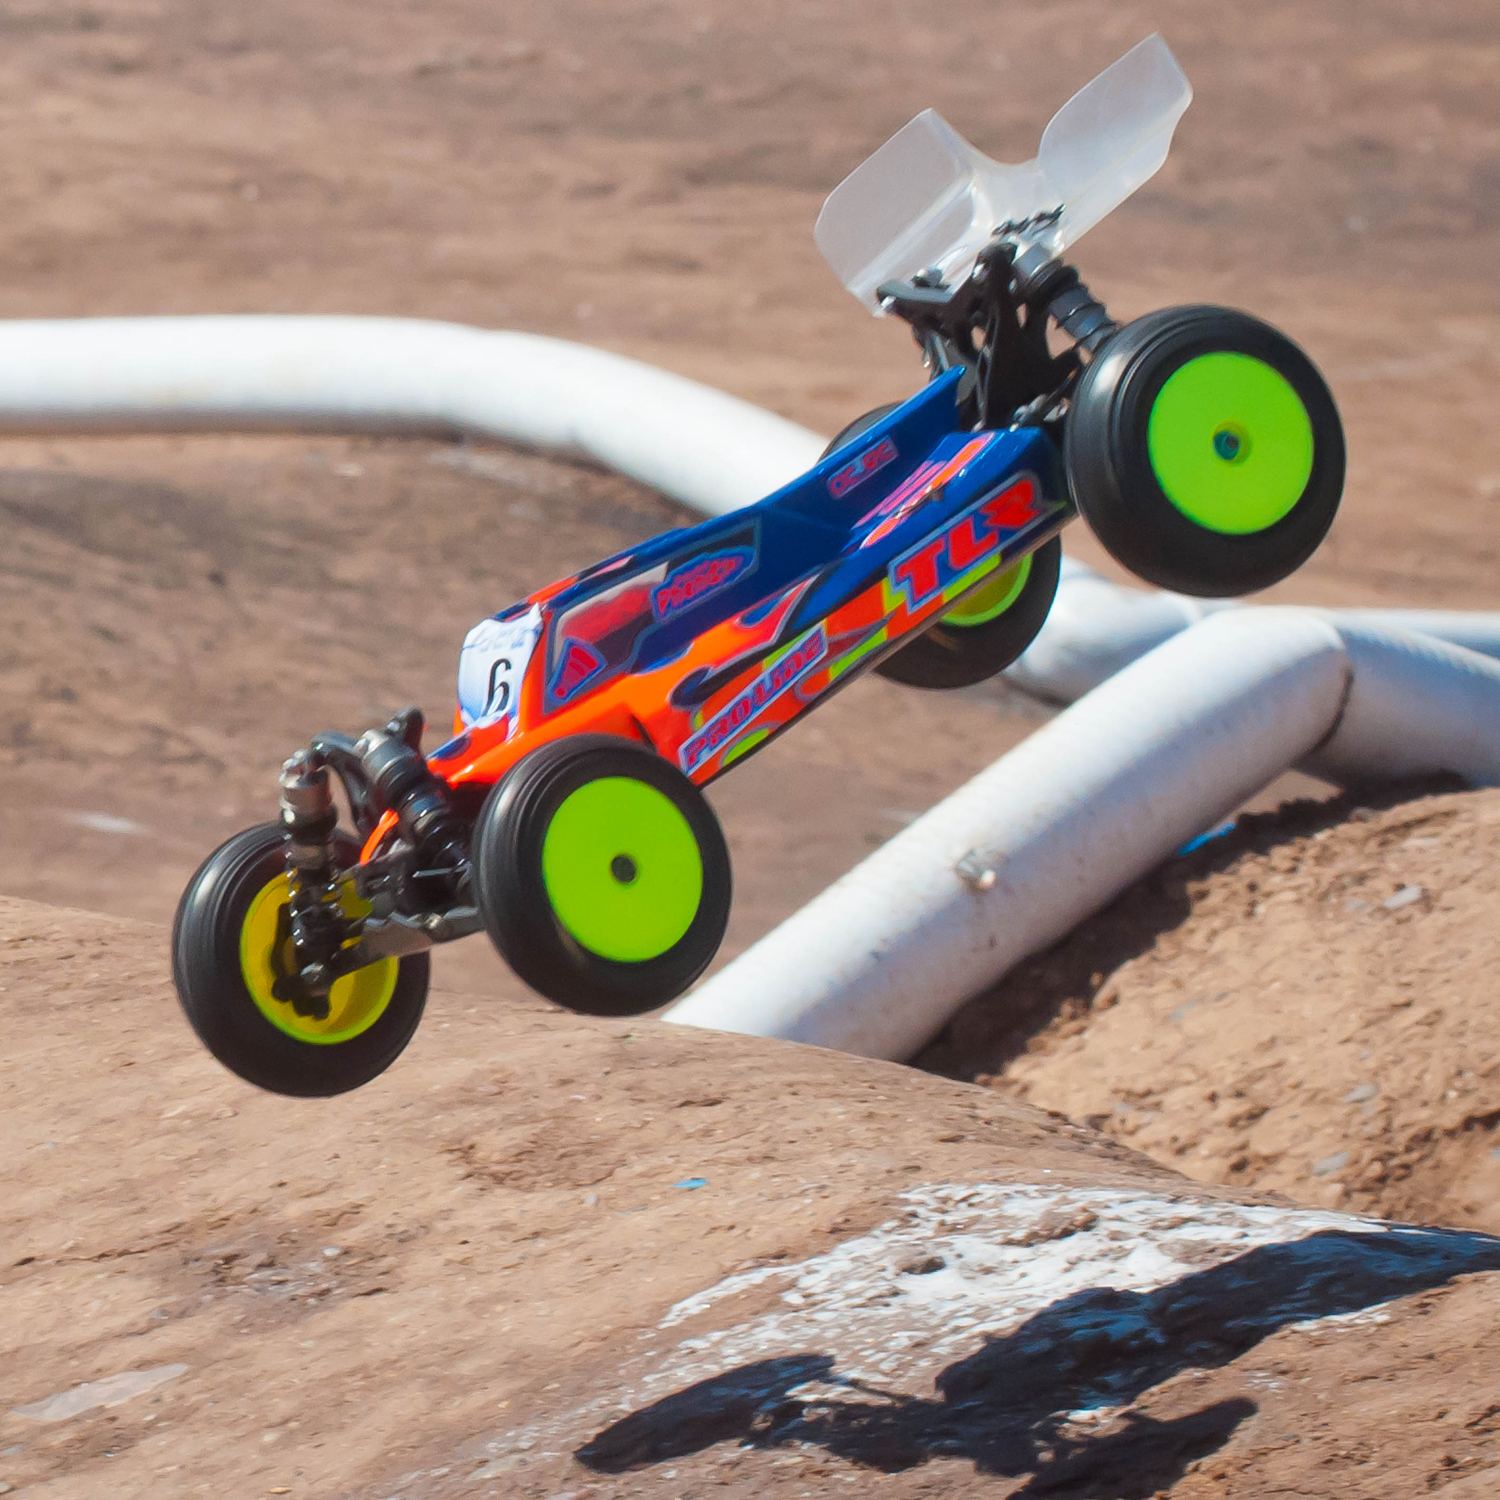 Dakotah Phend does the double to highlight Cactus Classic main events